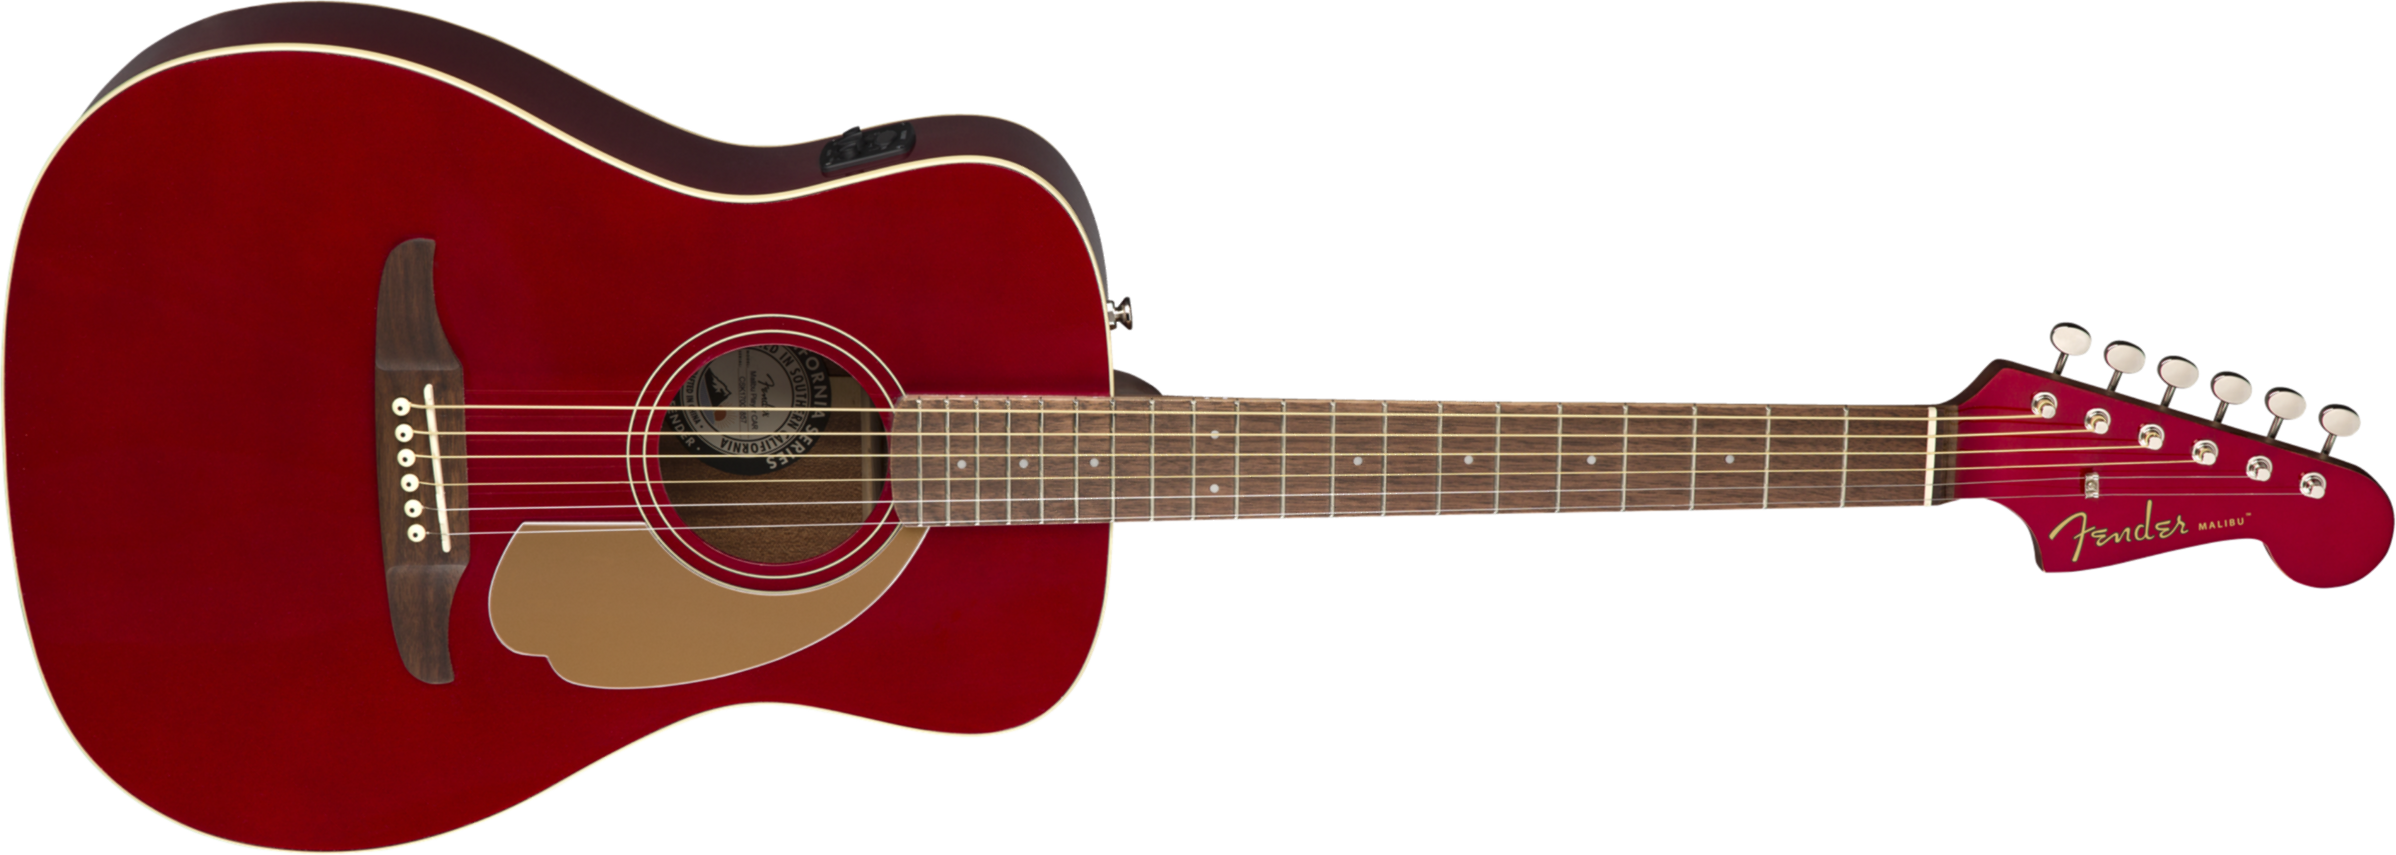 Fender Malibu Player - Candy Apple Red - Guitare Acoustique - Main picture